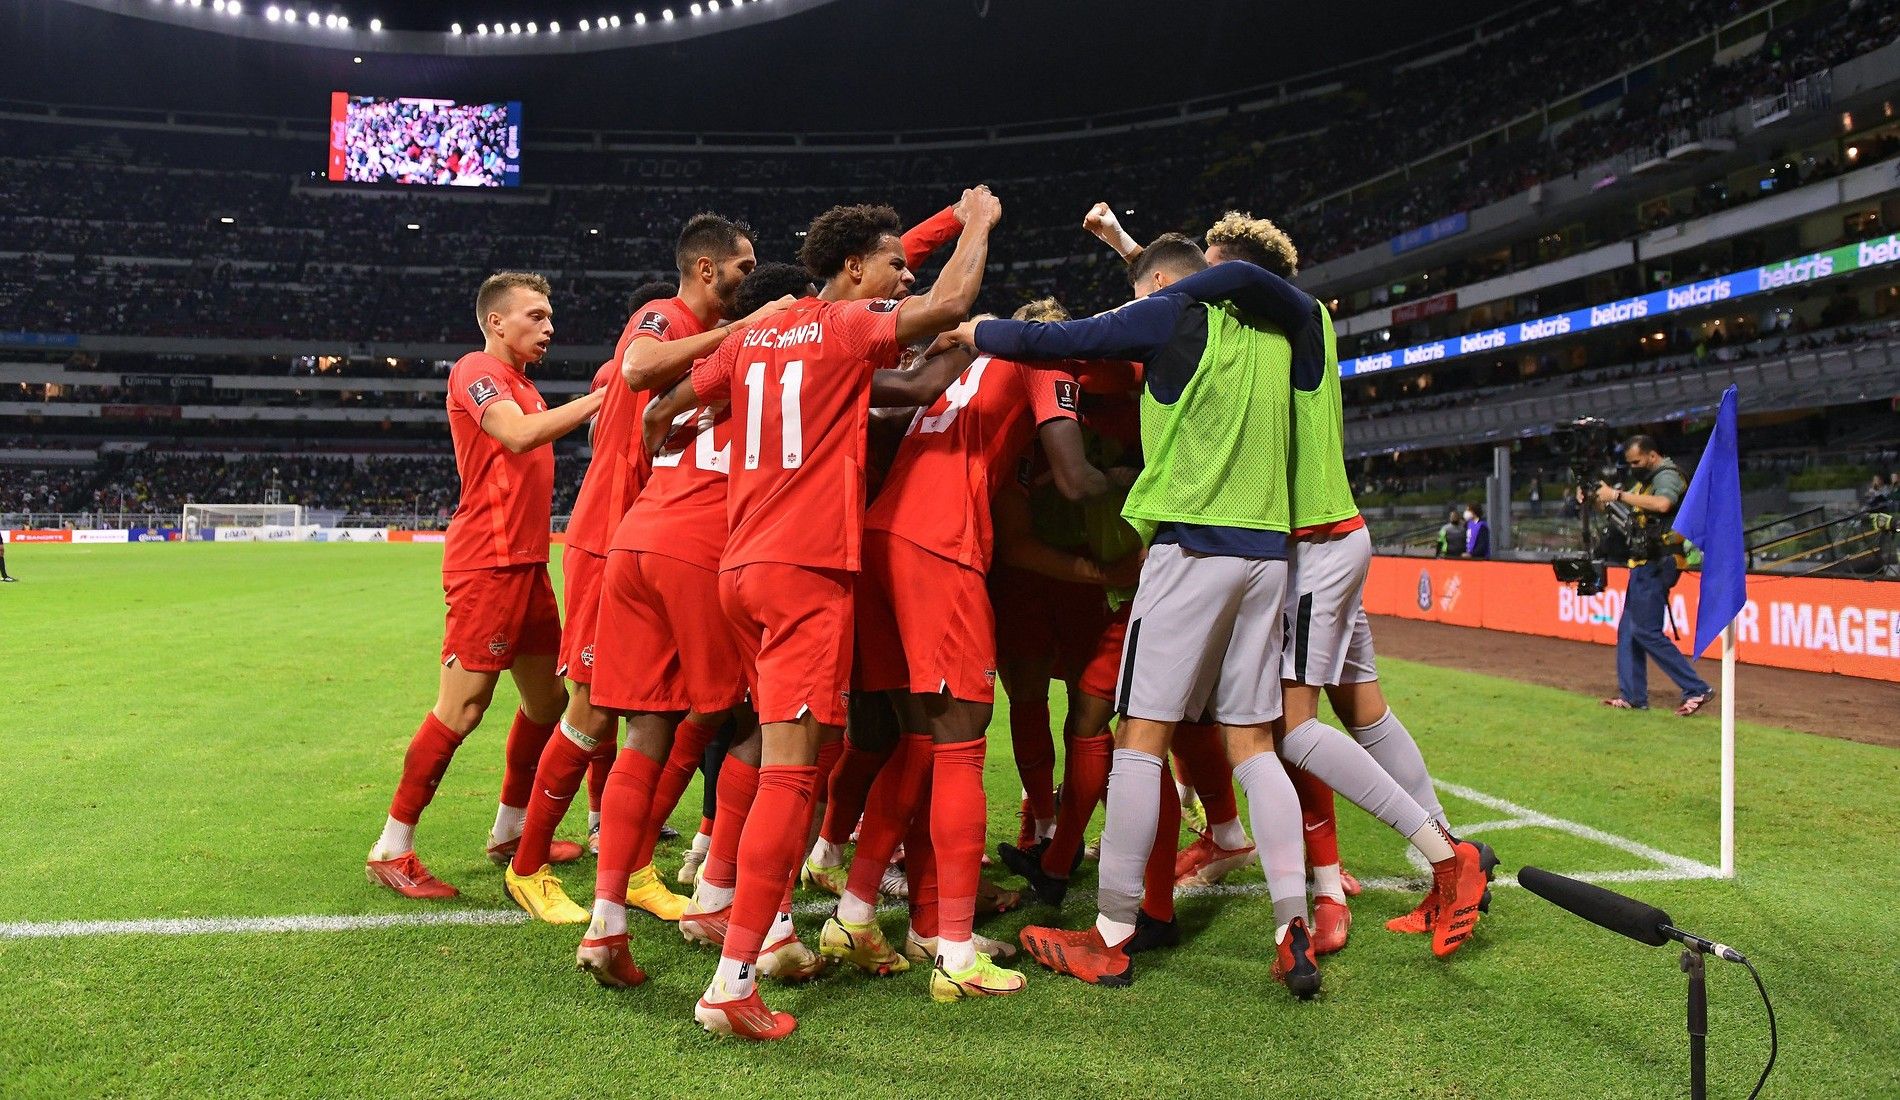 CanMNT Talk: A memorable night and result at Estadio Azteca